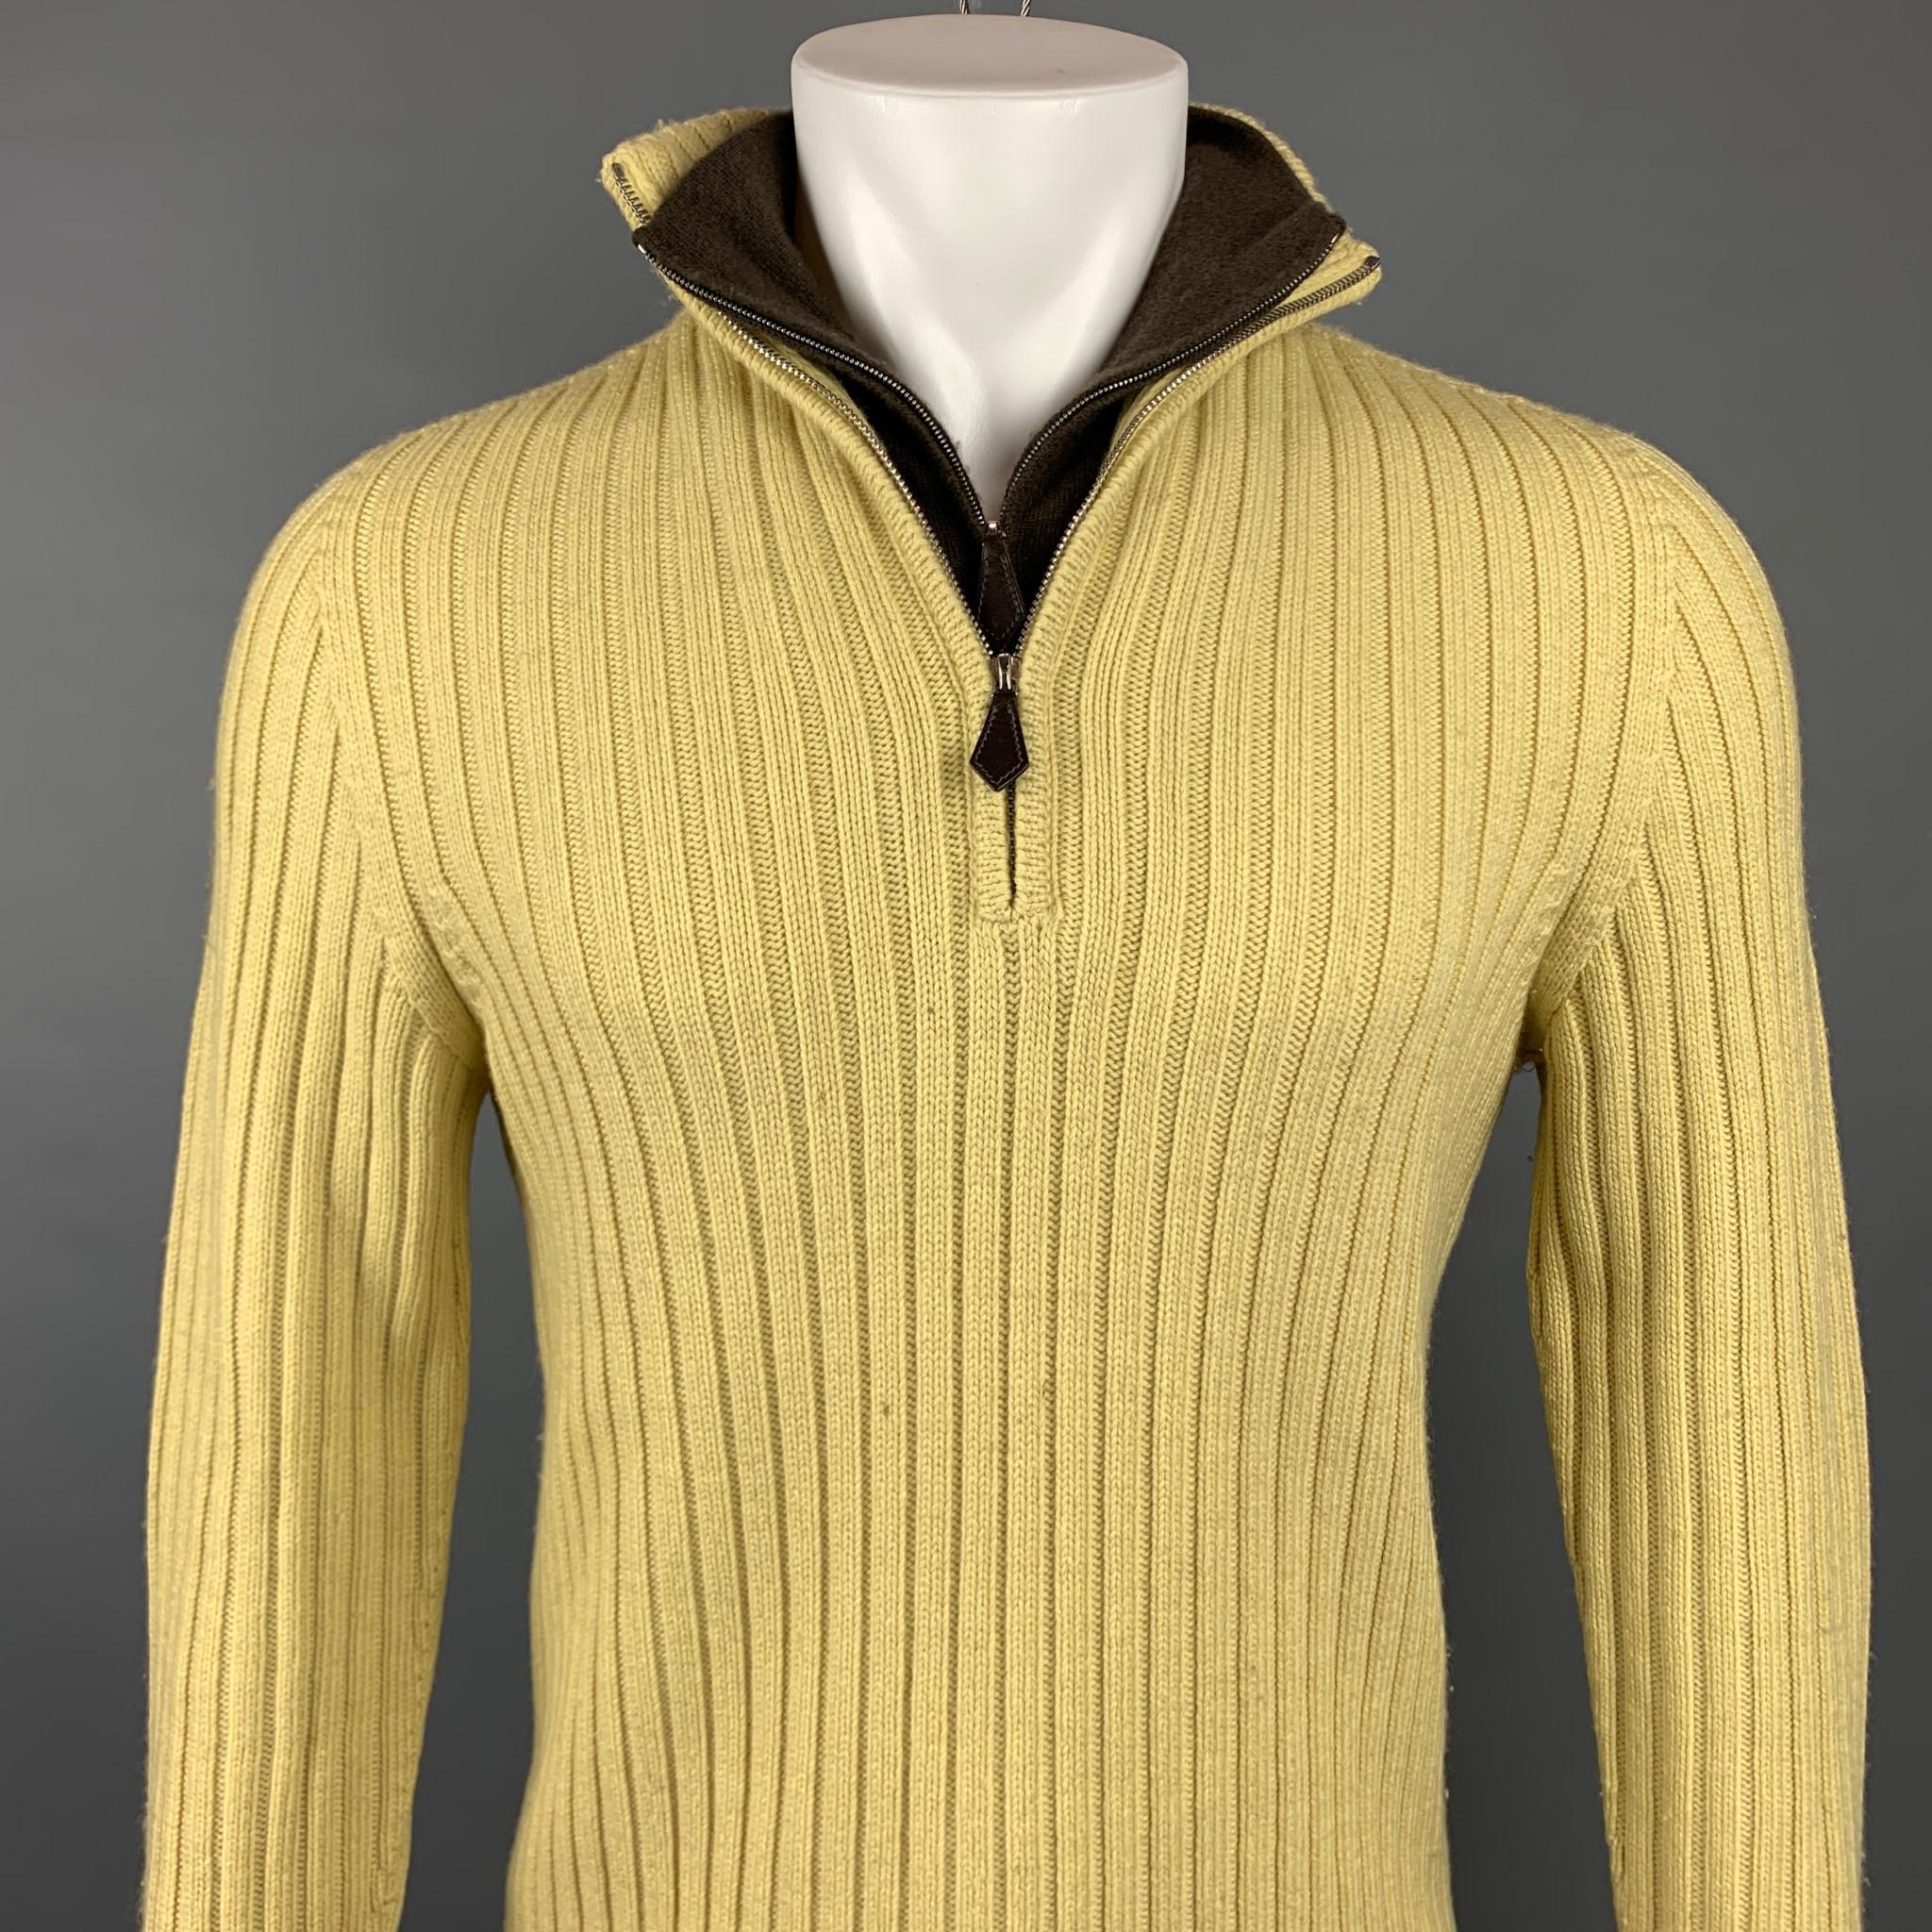 HERMES sweater comes in a yellow knit wool / cashmere featuring a double collar design and a half zip up closure. Italy.

Good Pre-Owned Condition. Moderate pilling throughout.
Marked: L

Measurements:

Shoulder: 16.5 in.
Chest: 40 in.
Sleeve: 28